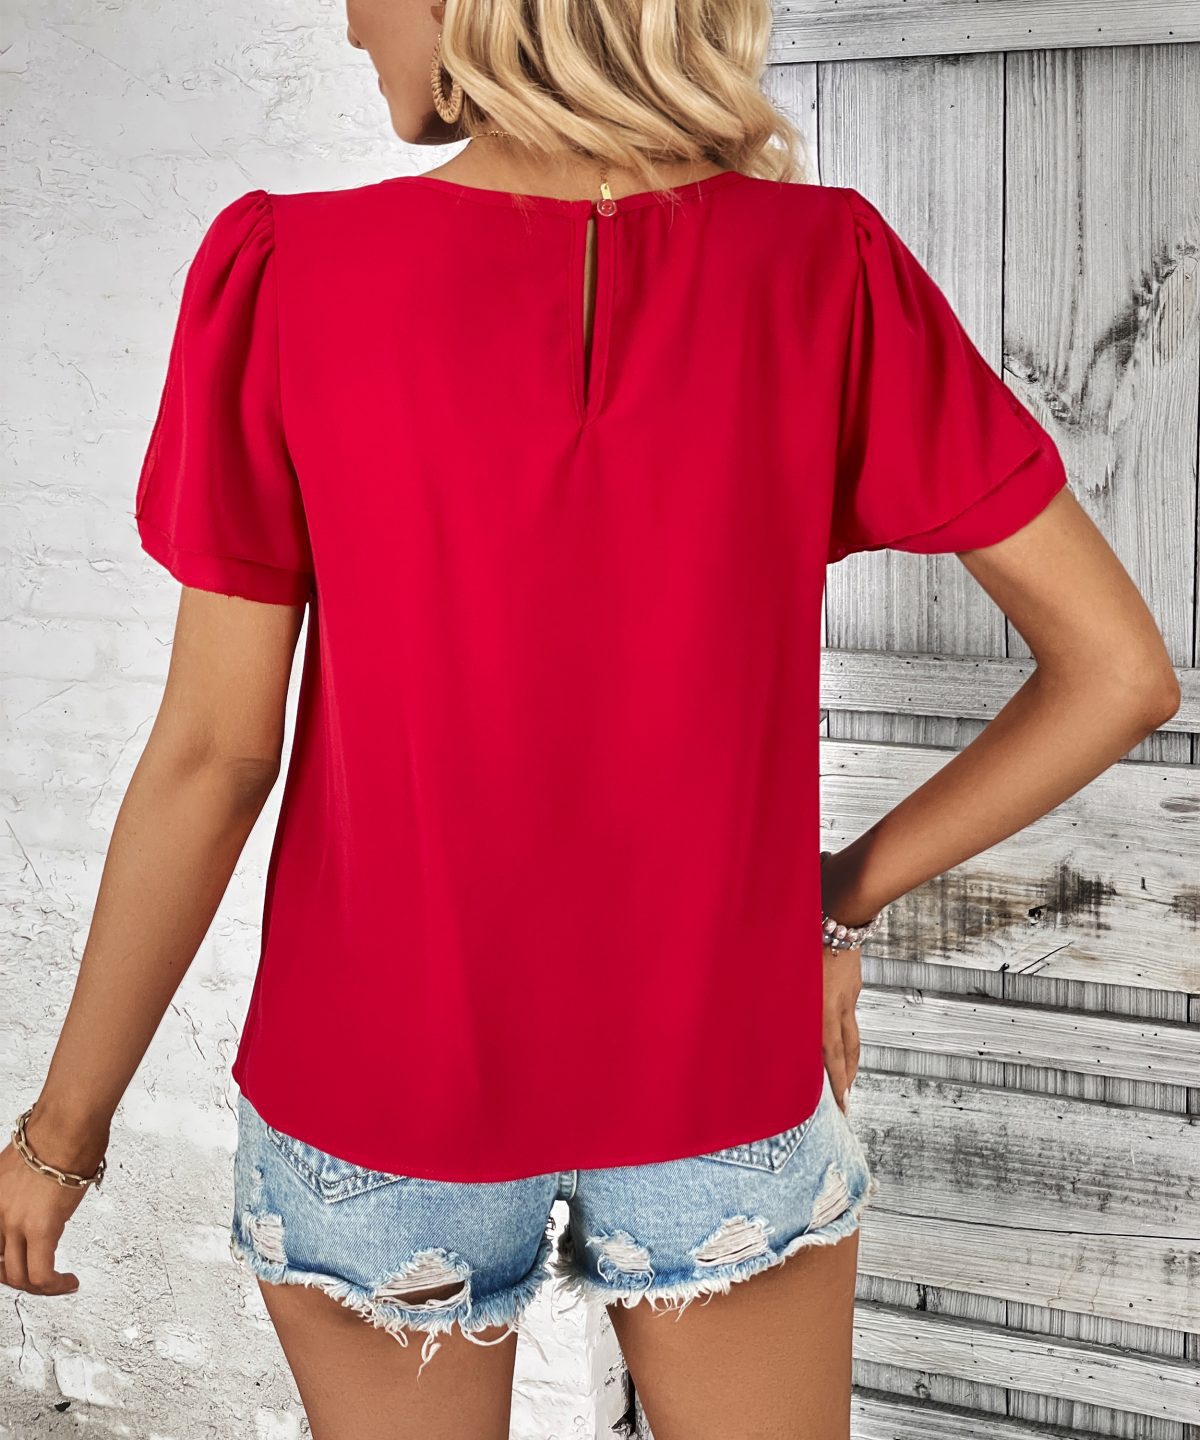 Summer Short Sleeved Red Shirt in Blouses & Shirts